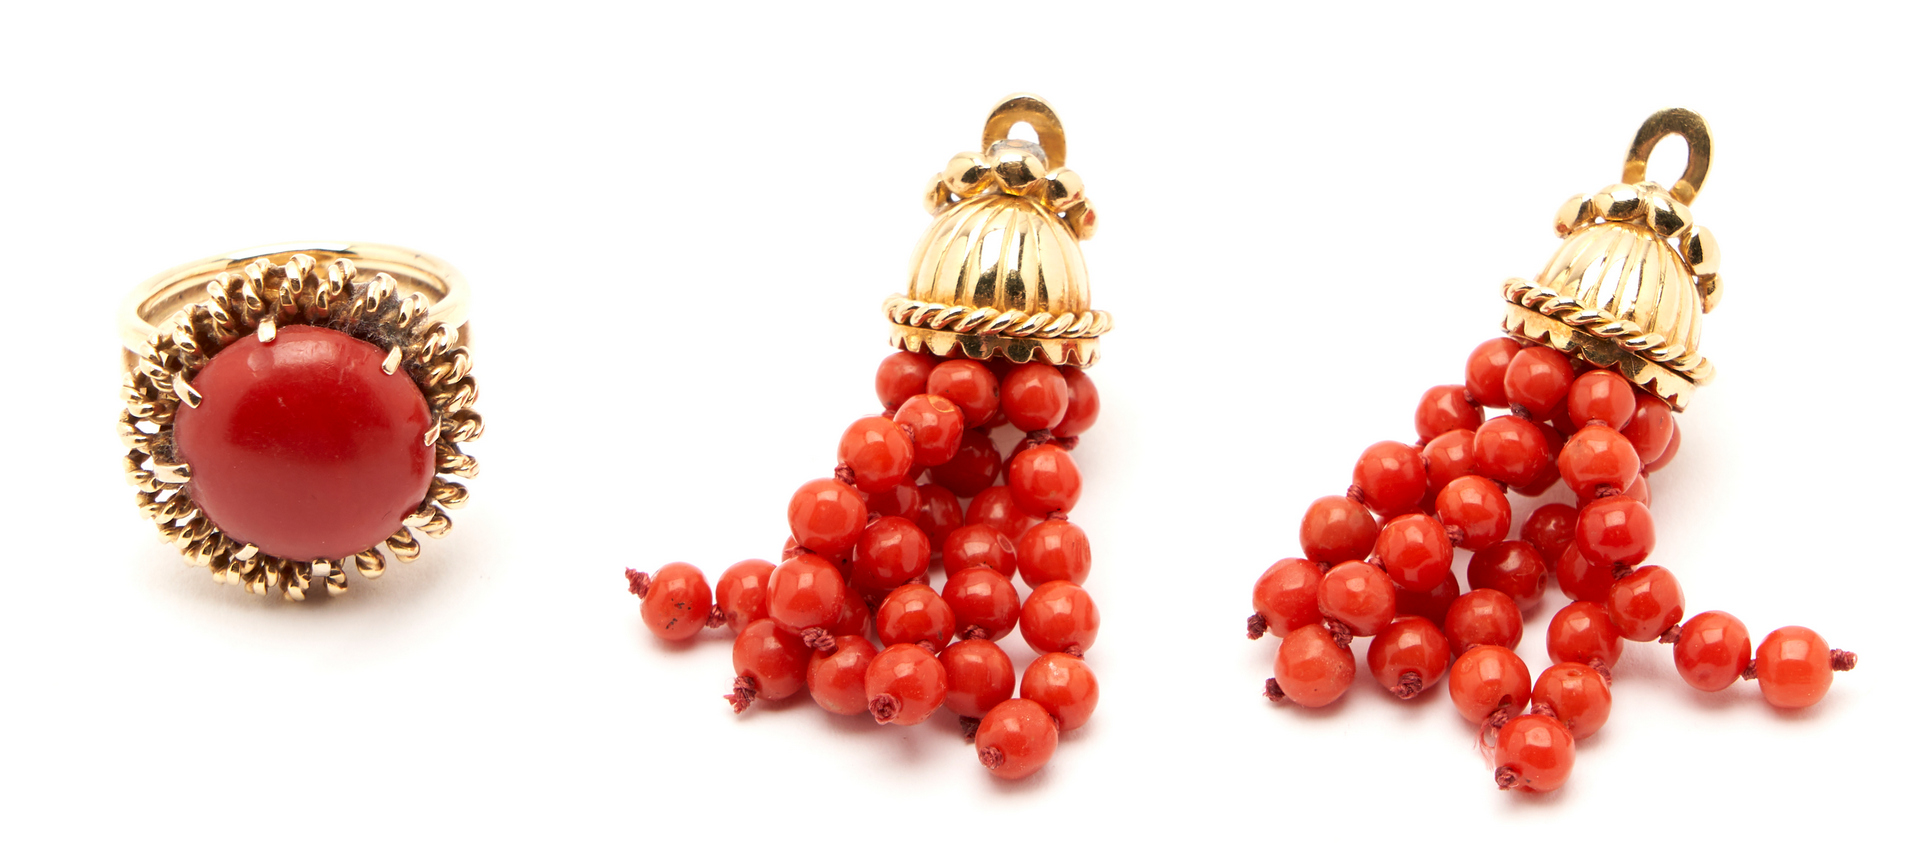 Lot 18: 18K Red Coral Necklace, Ring, & 14K Earrings